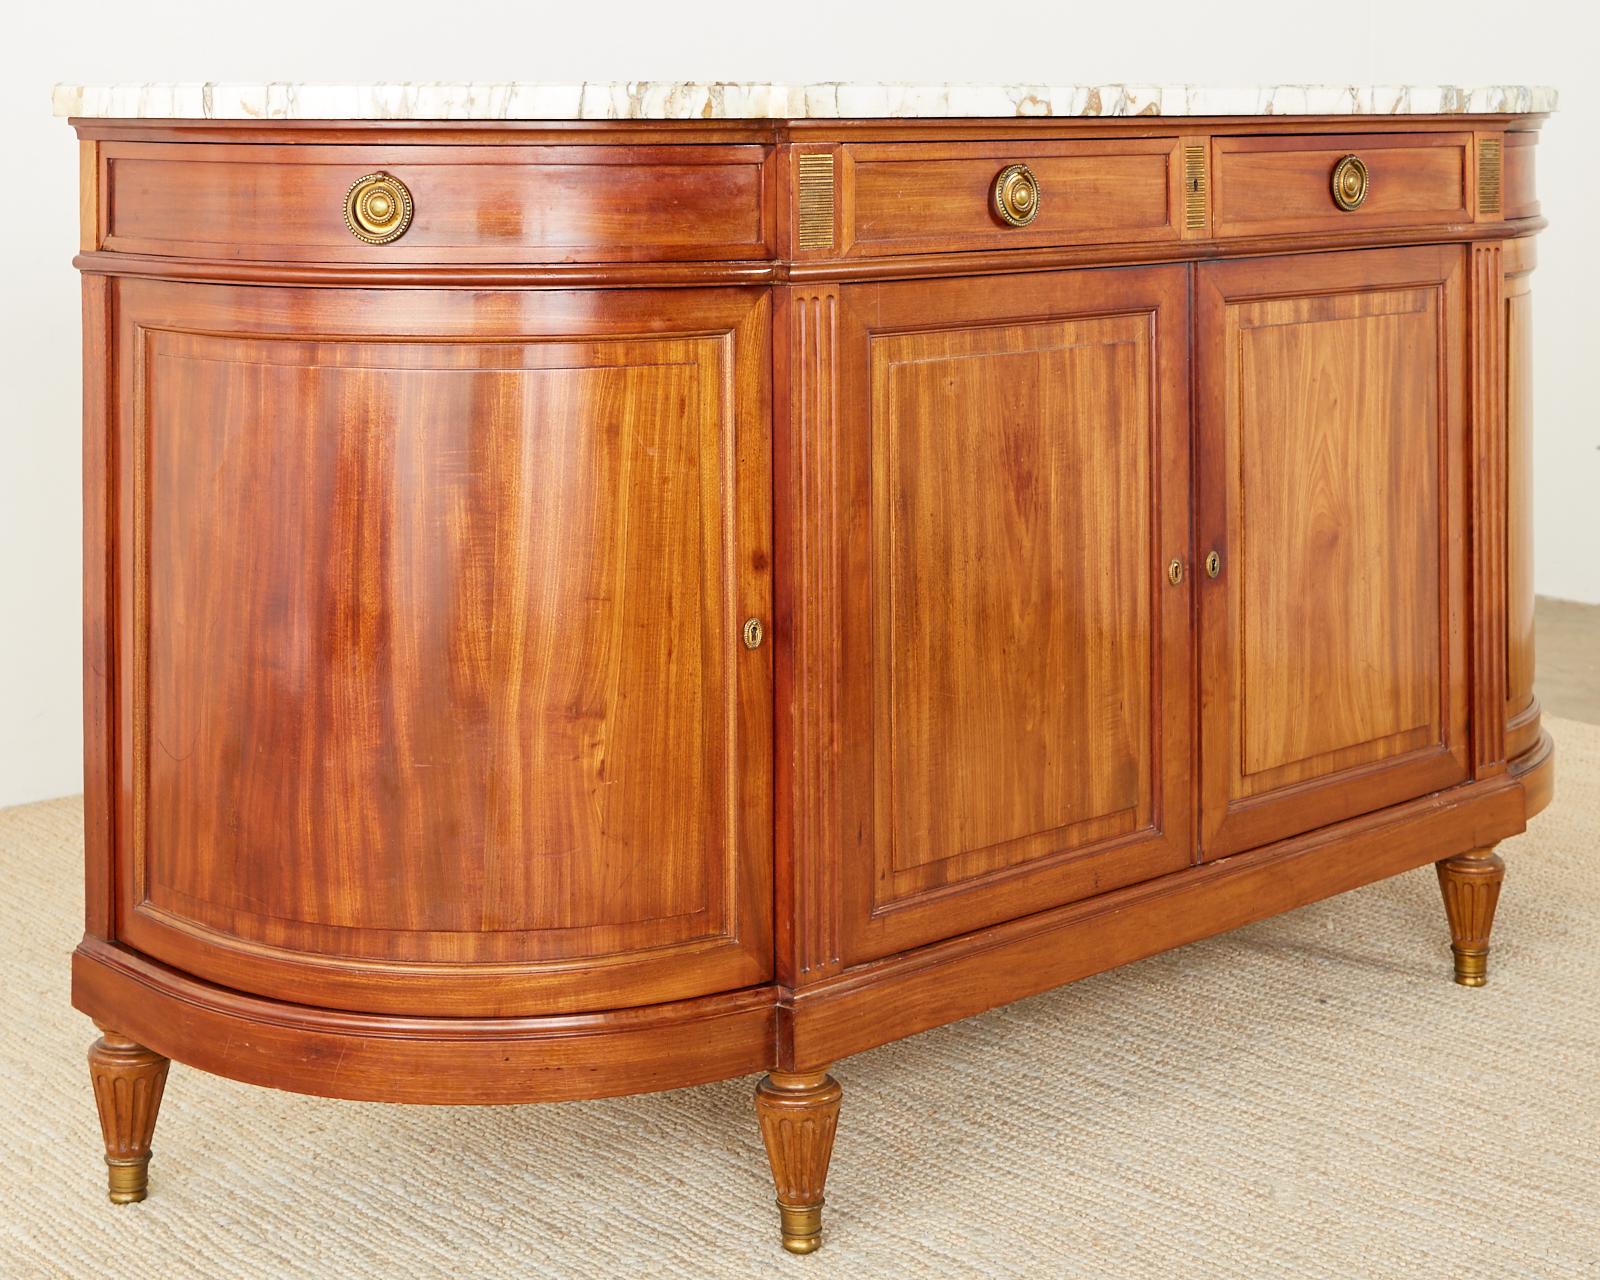 20th Century French Louis XVI Style Mahogany Marble-Top Sideboard Buffet